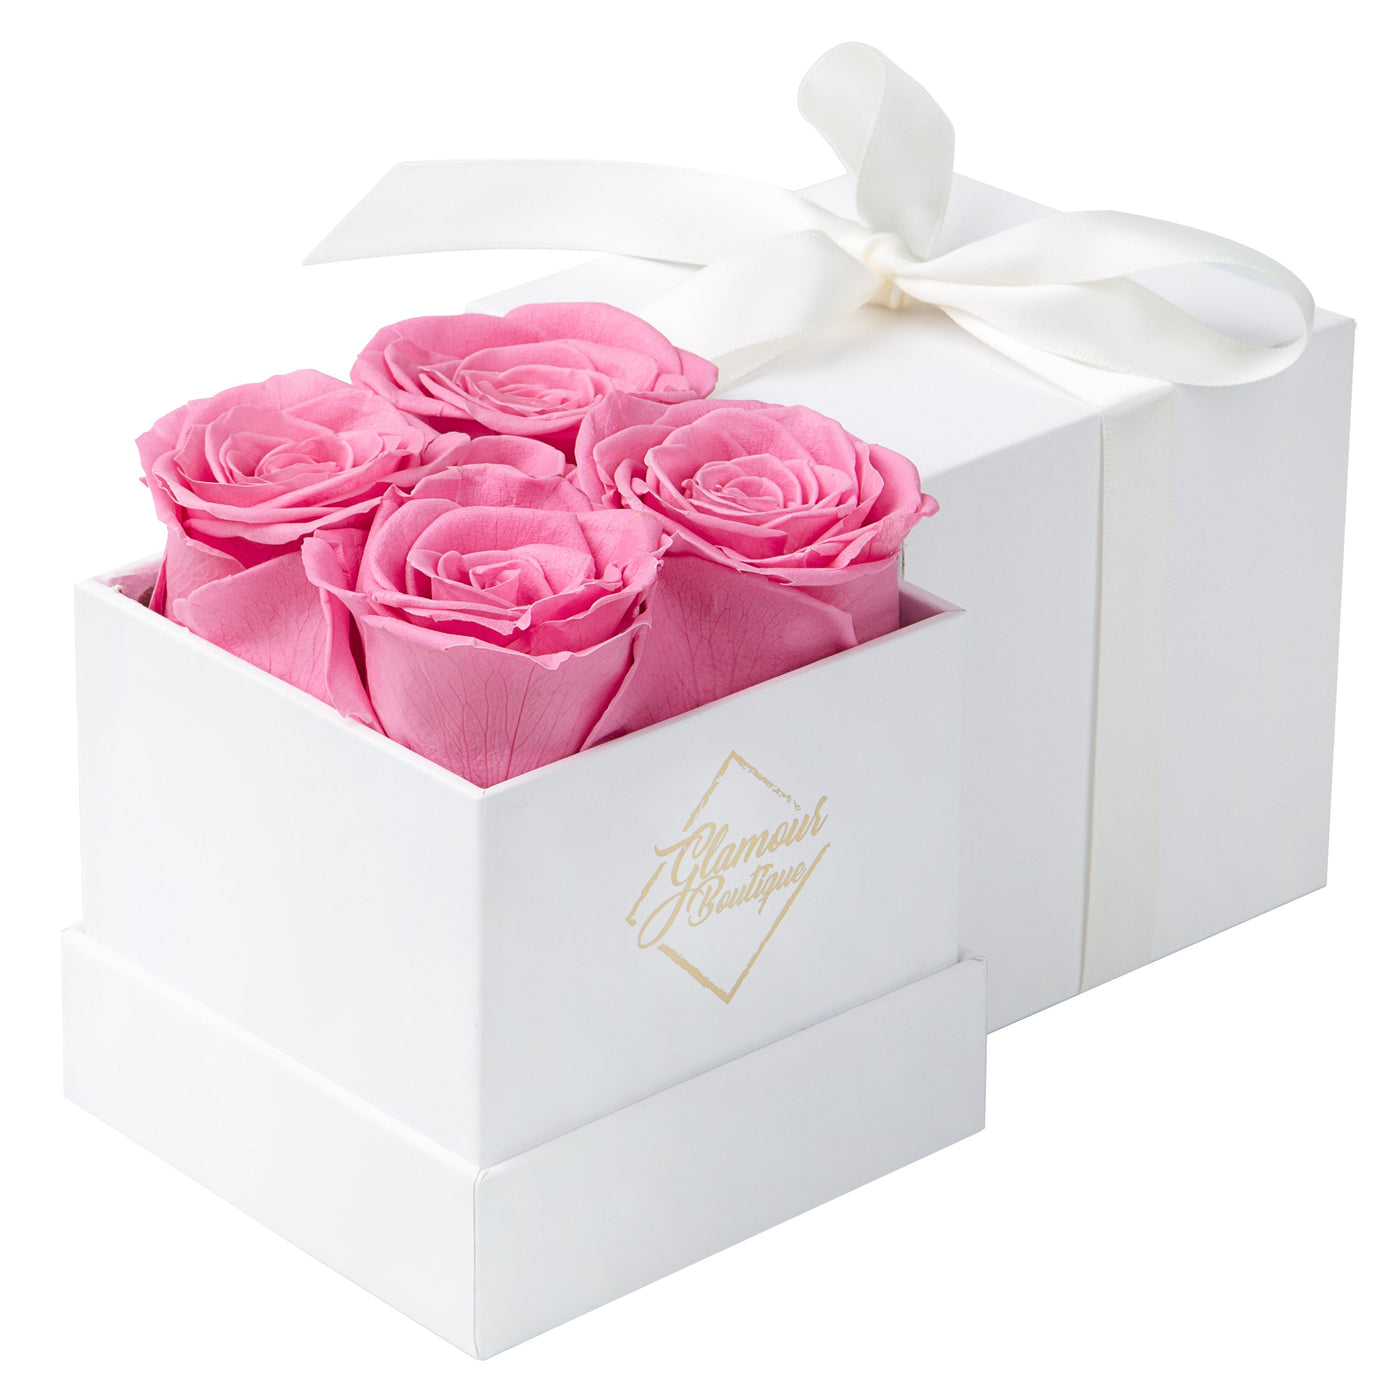 Preserved Roses in a Box Cased in A Square Gift Box with Lid - Pink